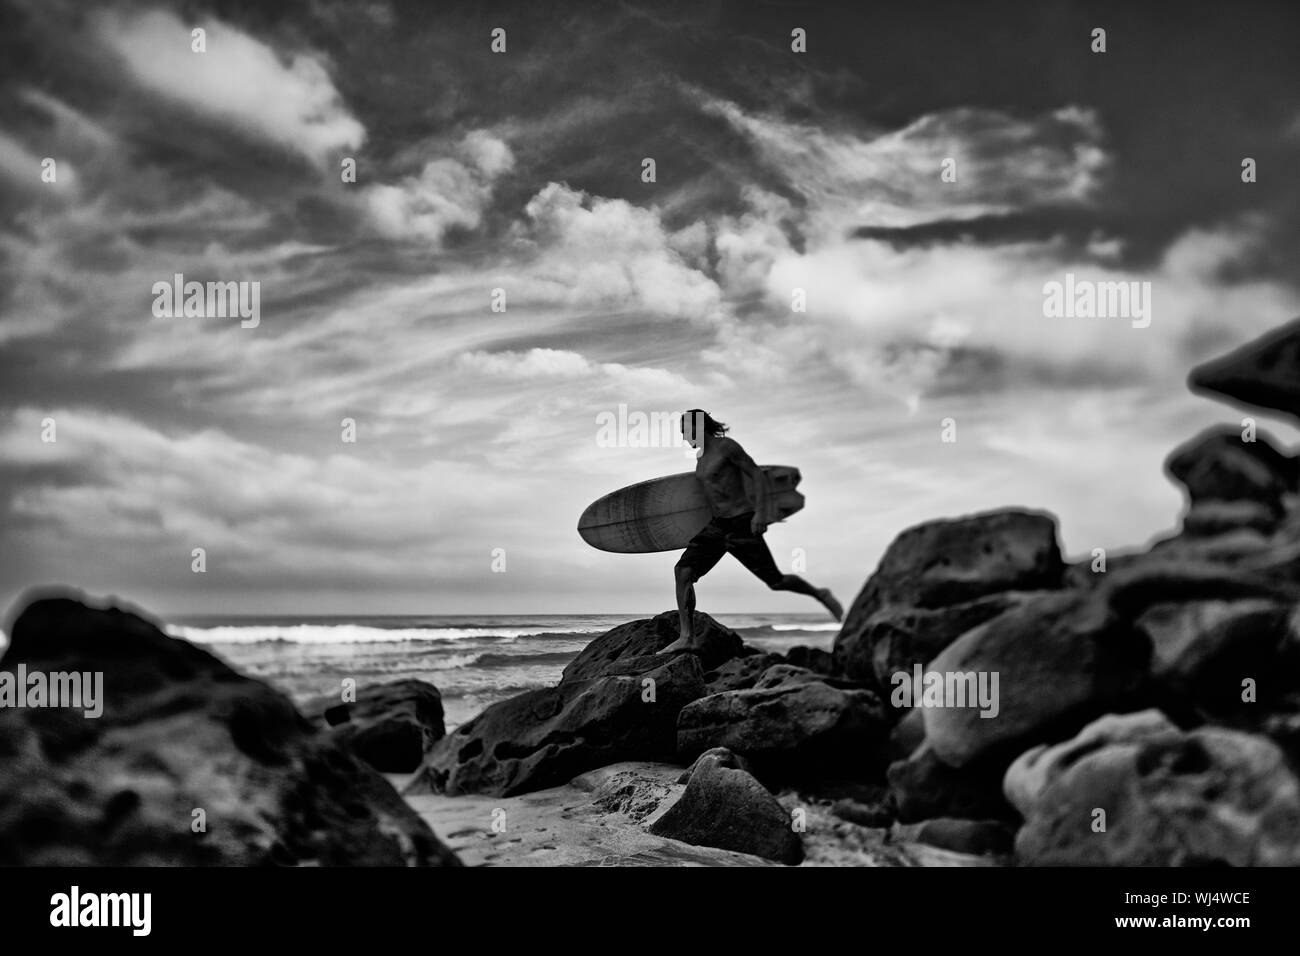 Male surfer with surfboard on rocky ocean beach, Higuera Blanca, Nayarit, Mexico Stock Photo